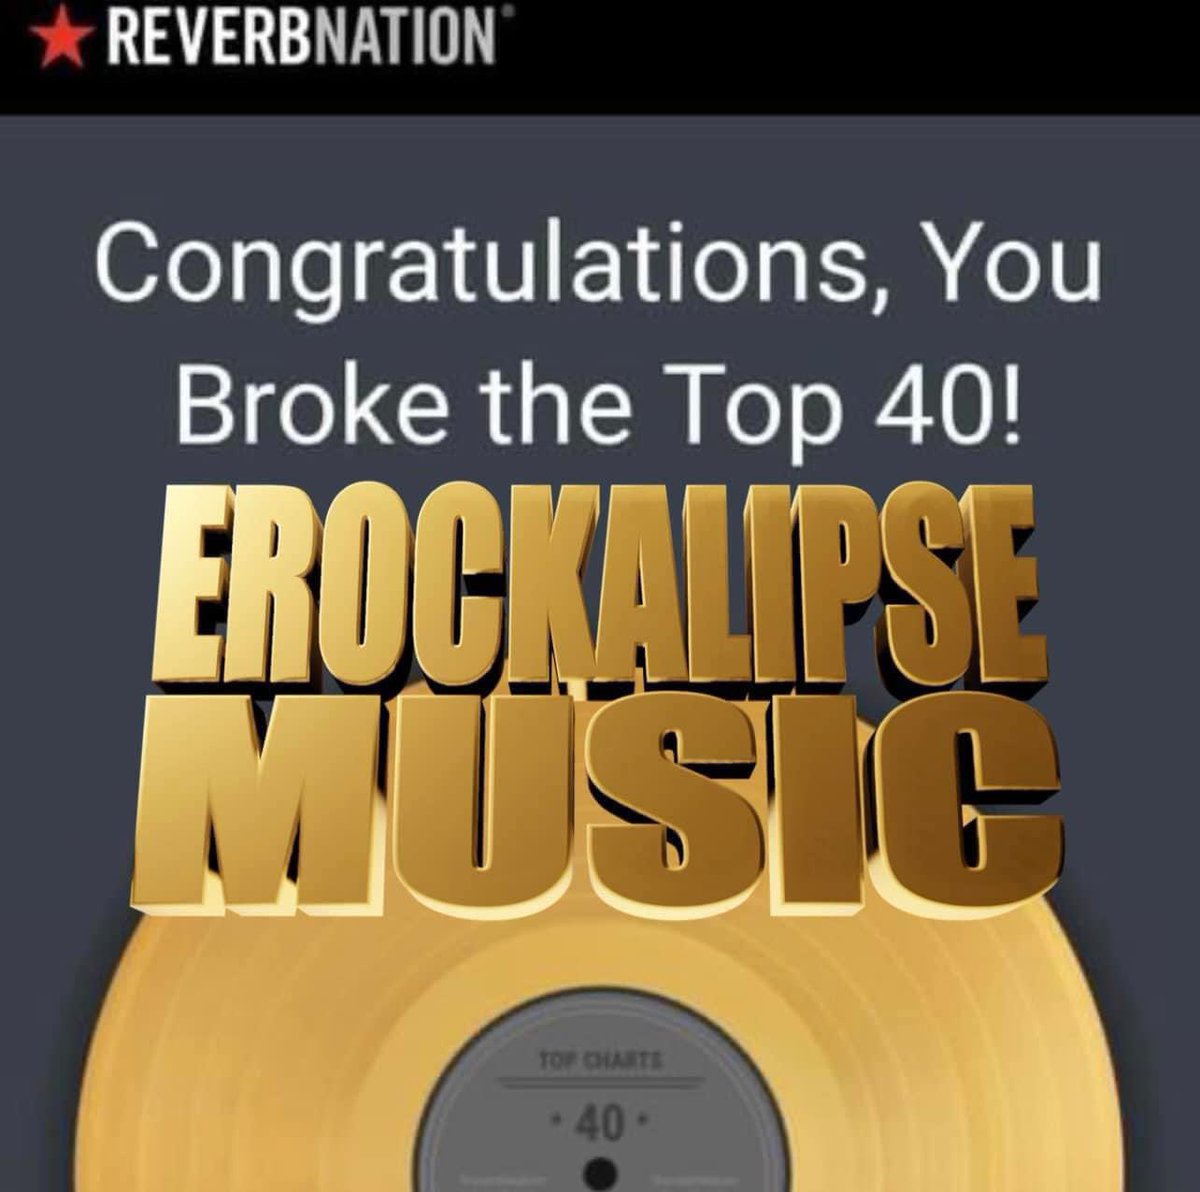 Thank you to all my #Winners for listening and keeping my #music in the Top 40 on #Reverbnation Become a fan today! reverbnation.com//erockalipse 
#hiphop #hiphopmusic #musicismylife